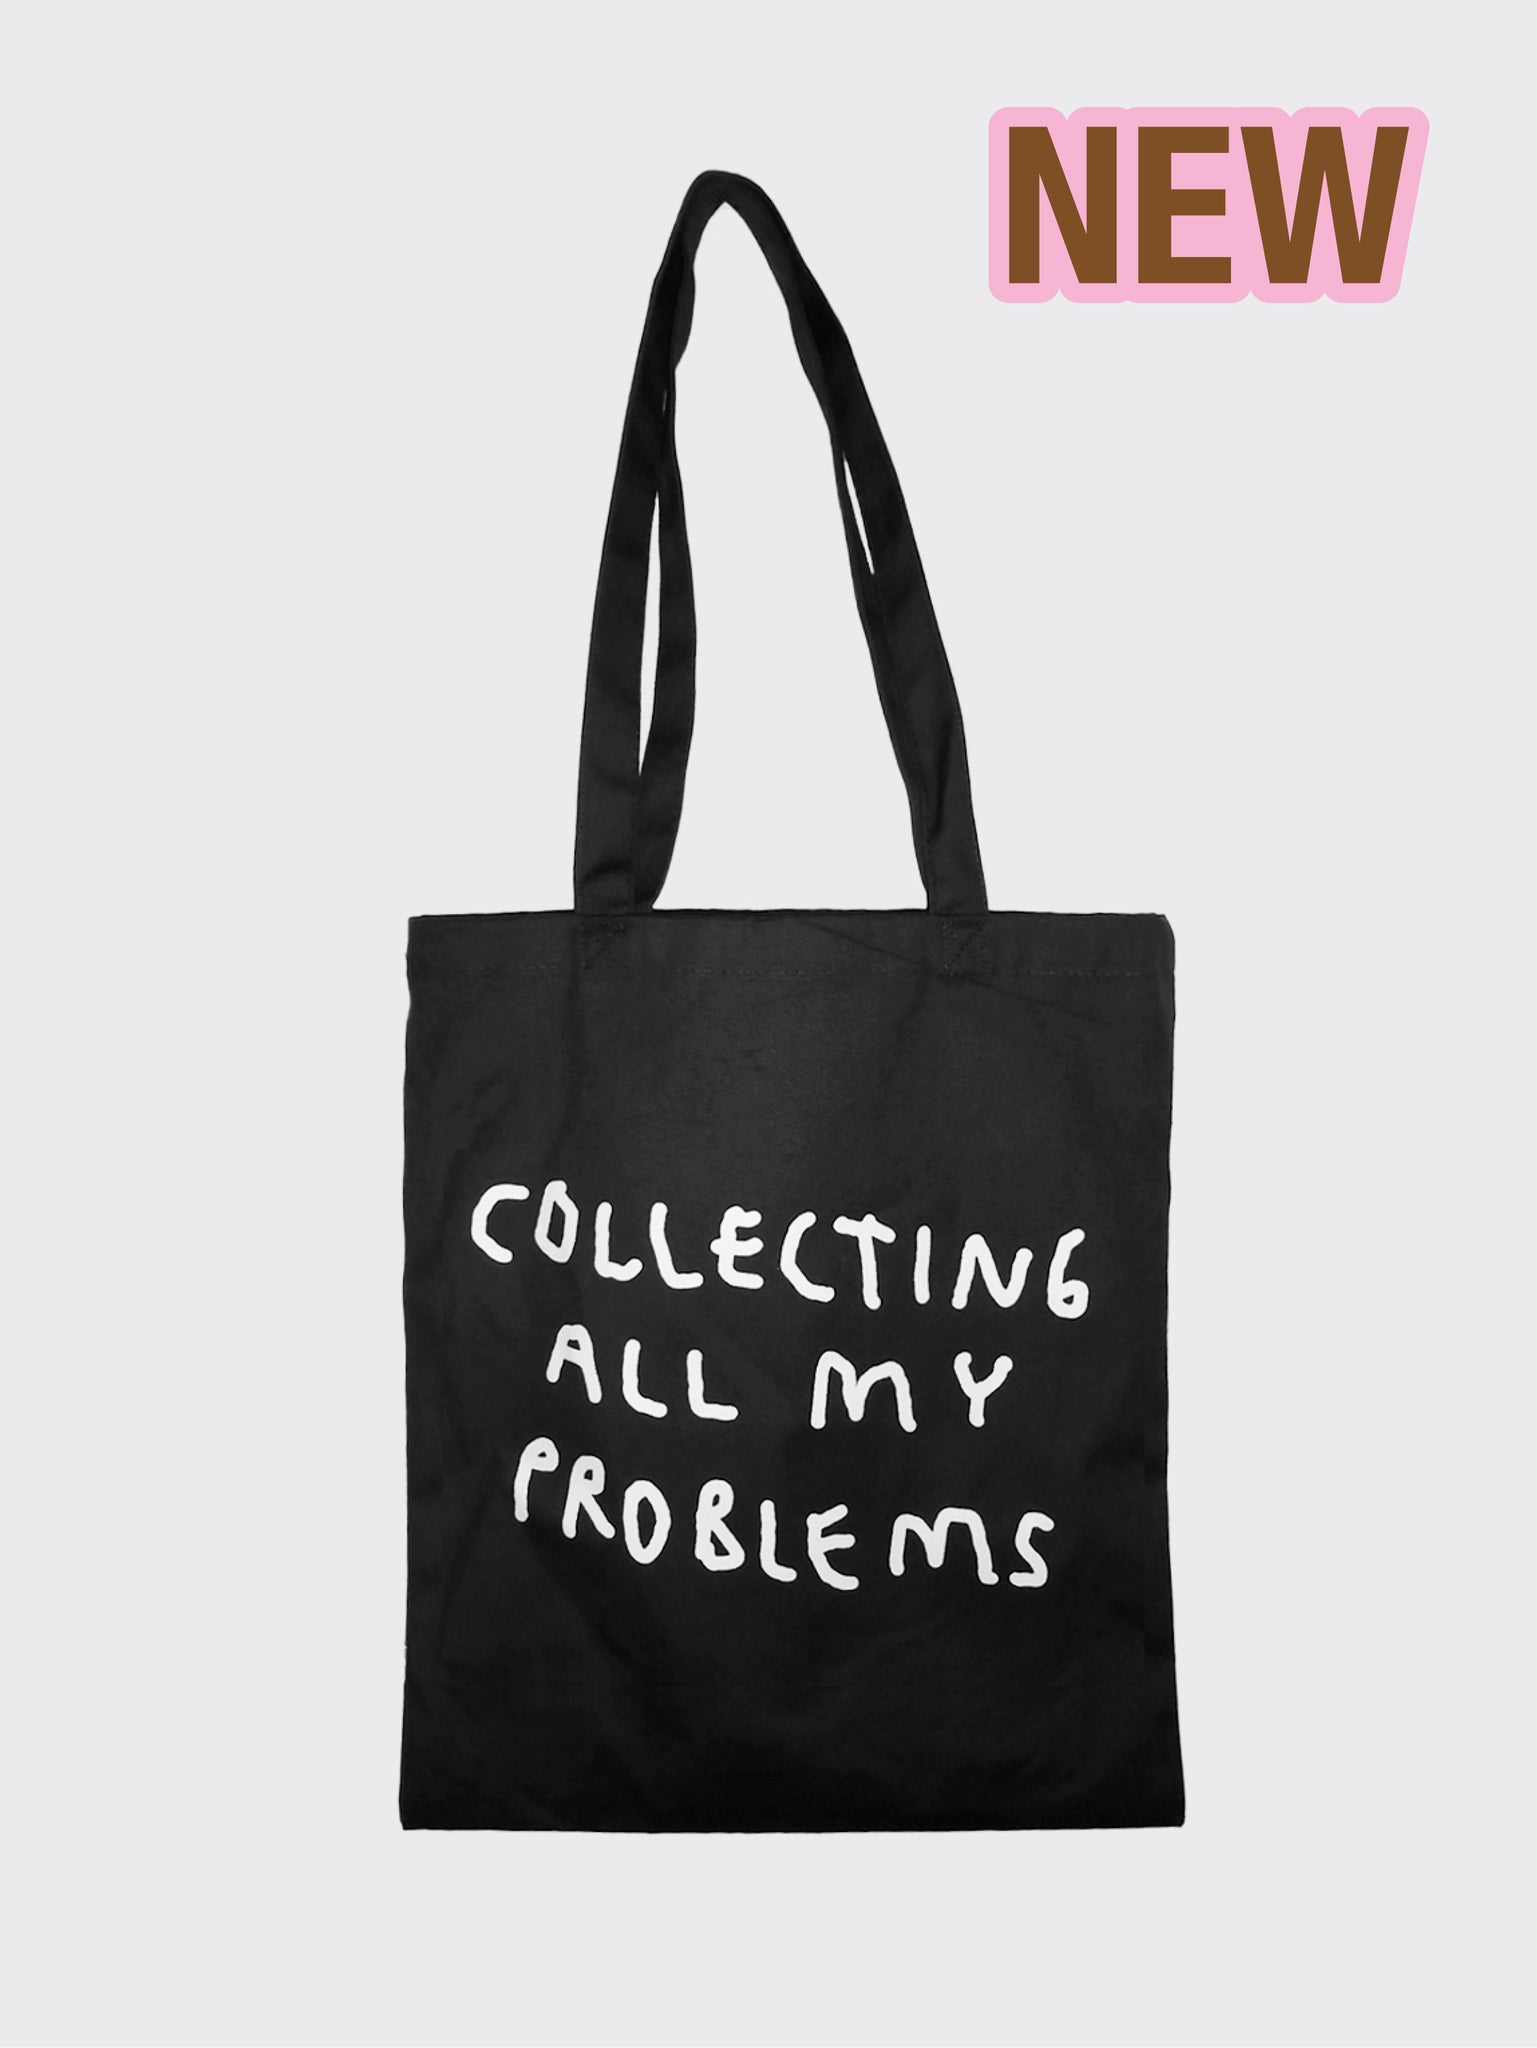 Collecting my problems - black version